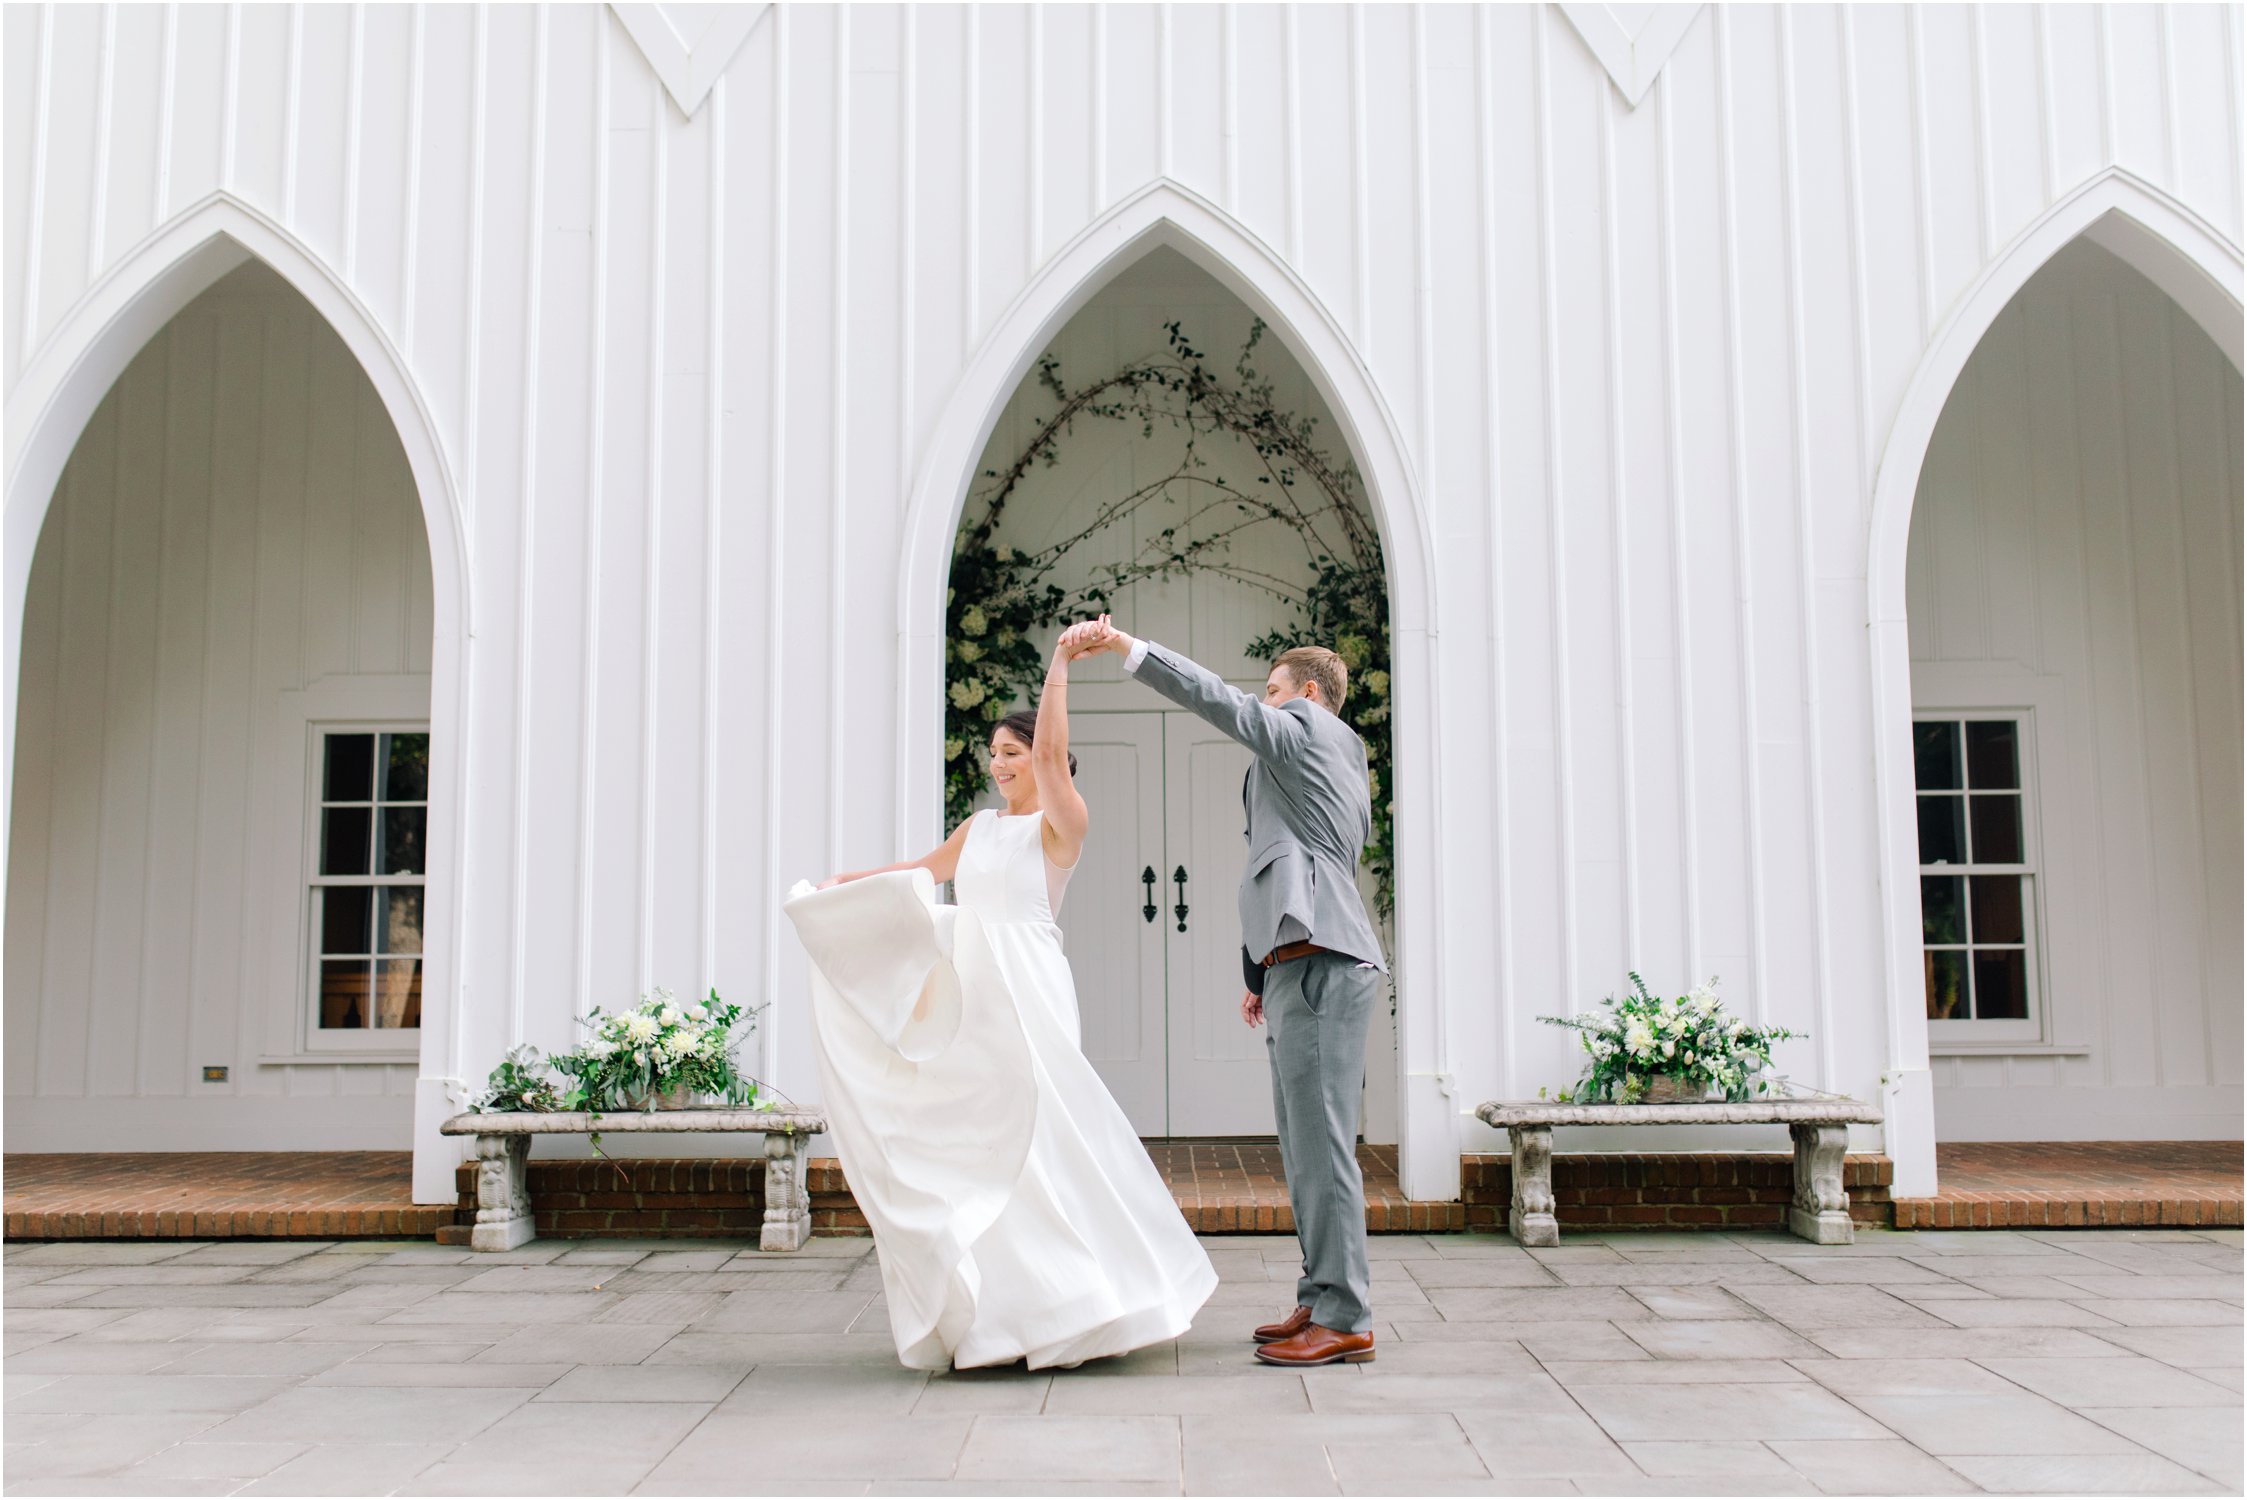 Groom twirls bride in front of a church